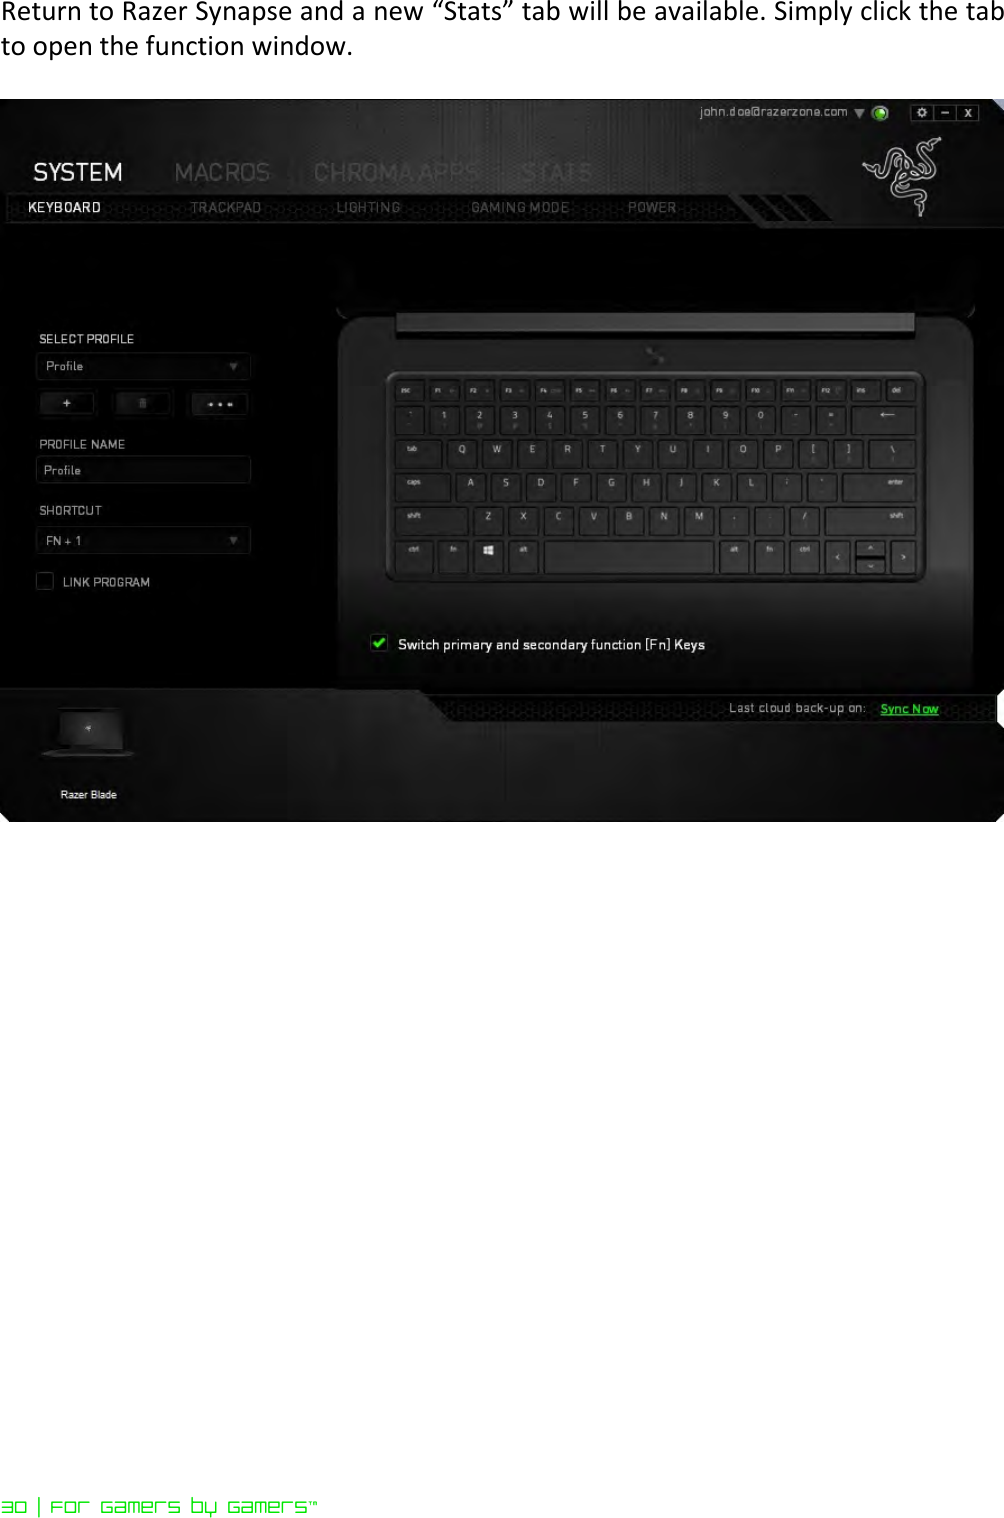 30 | For gamers by gamers™  Return to Razer Synapse and a new “Stats” tab will be available. Simply click the tab to open the function window.     